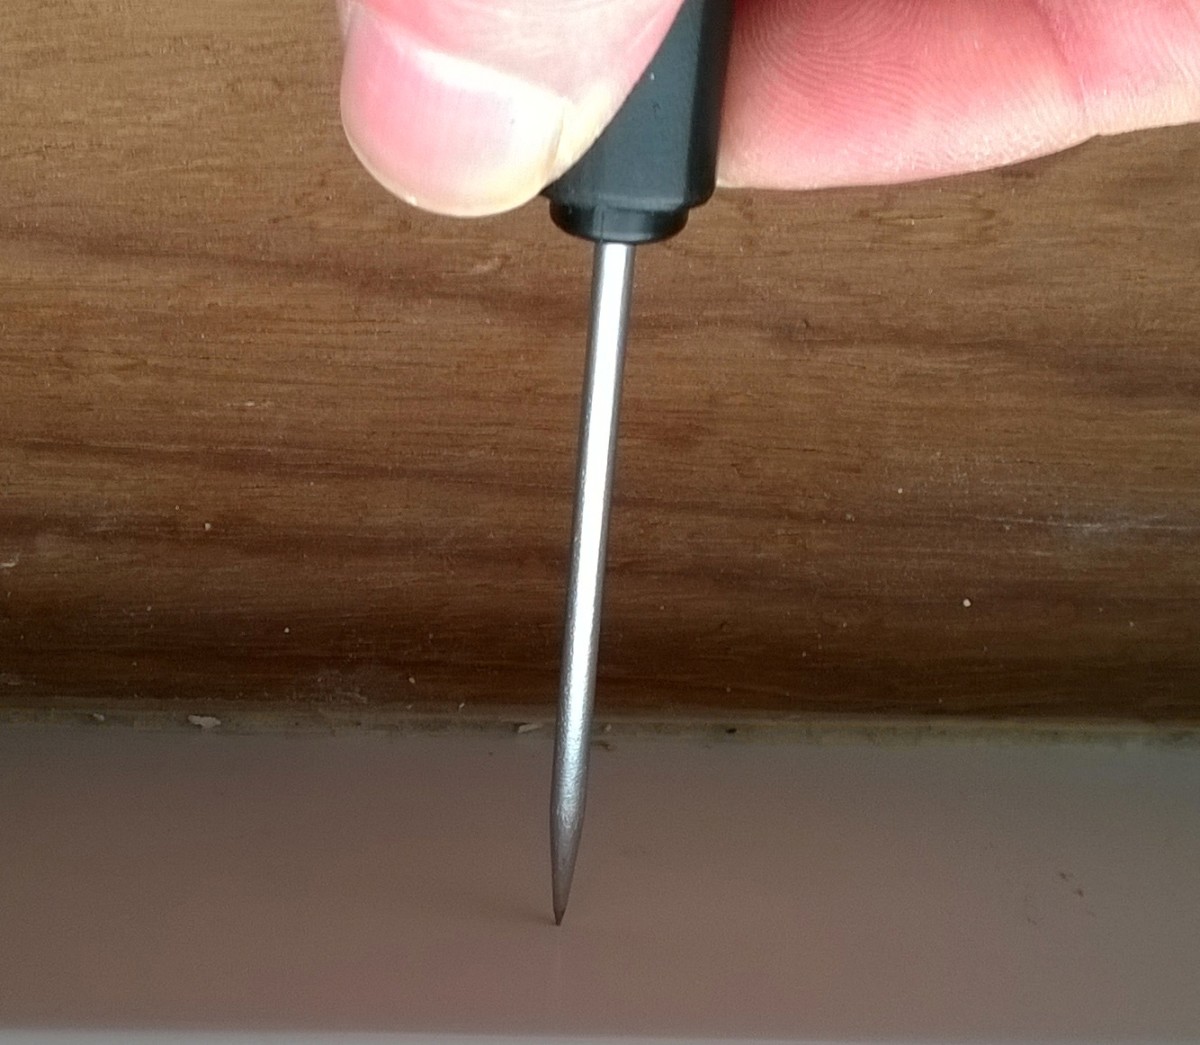 An awl is used for making holes prior to driving screws or drilling.